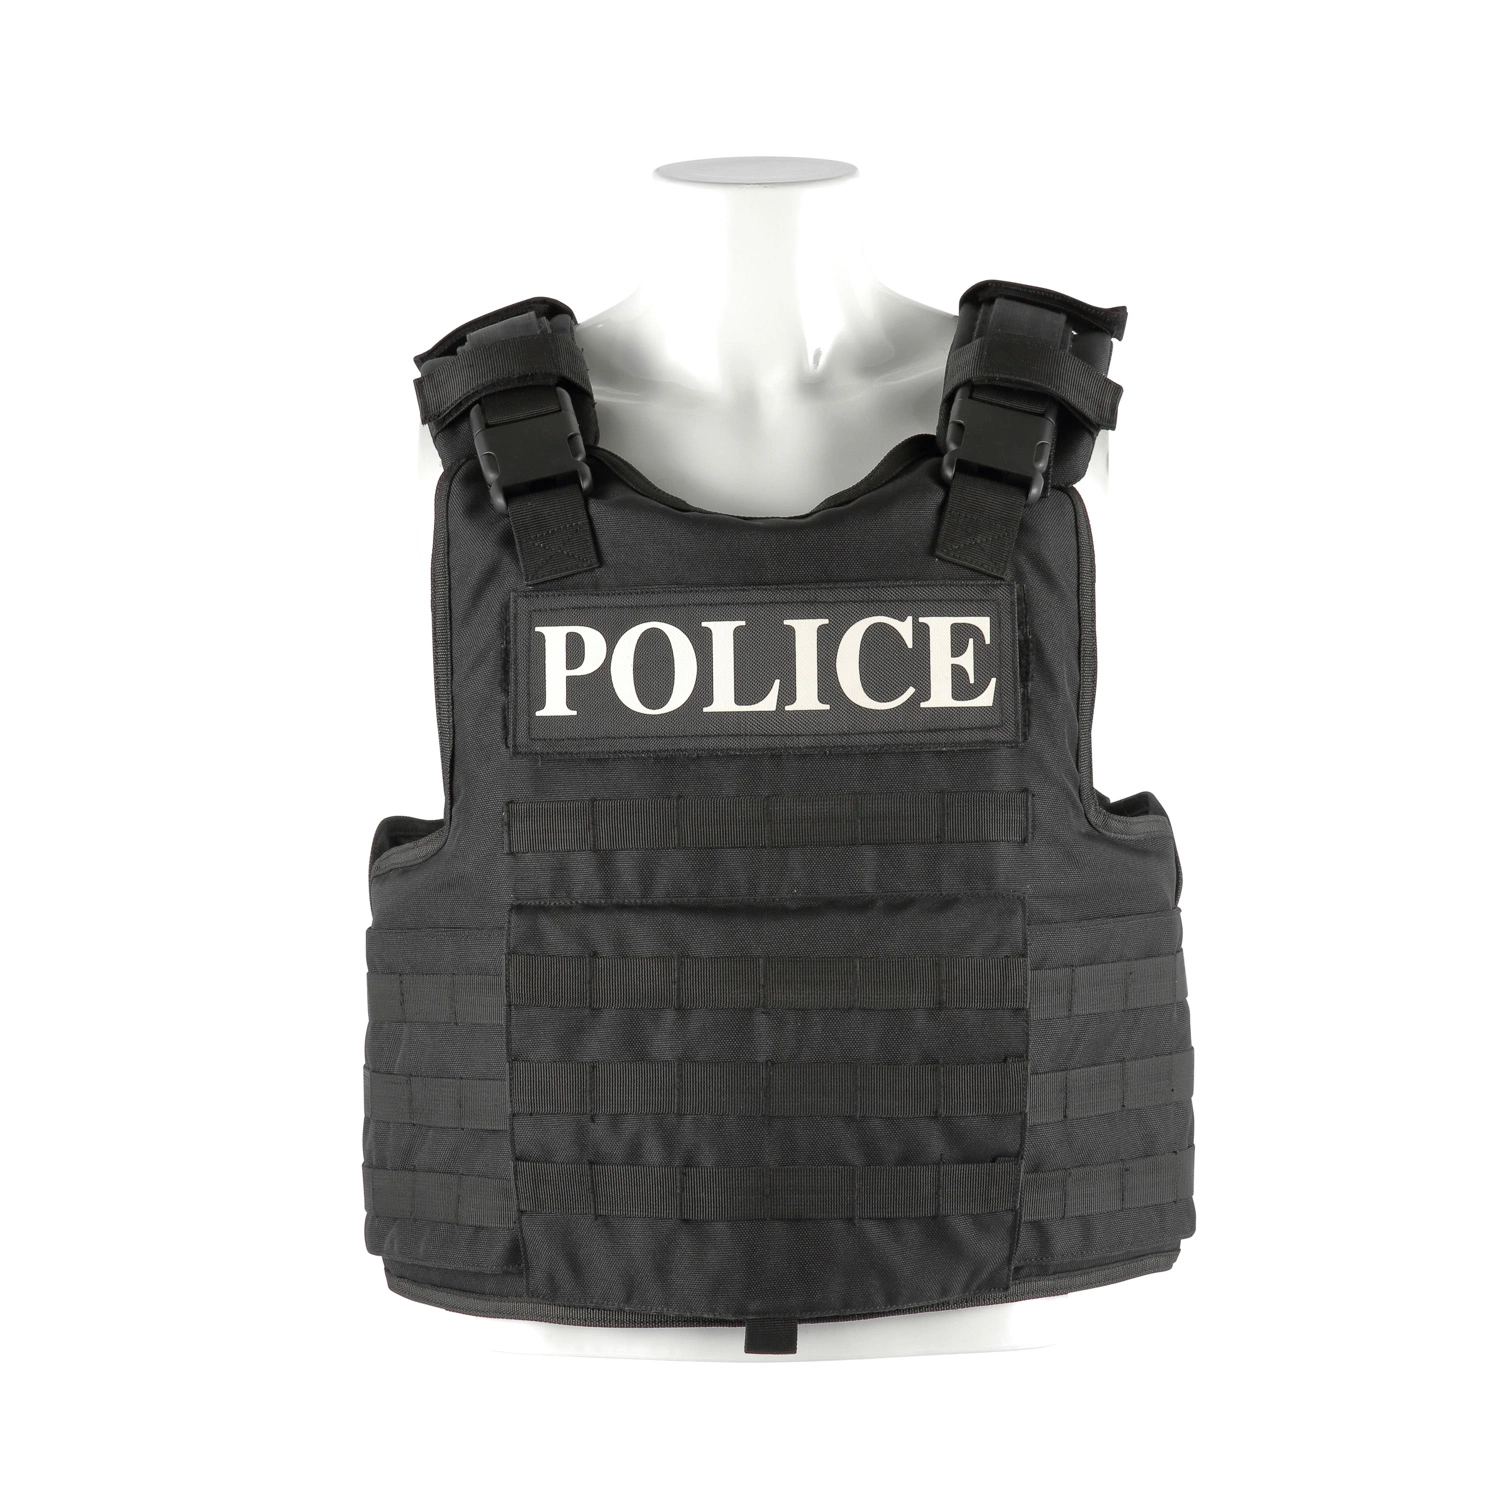 Other Police & Military Supplies Level IV Armor Sic Body Armor